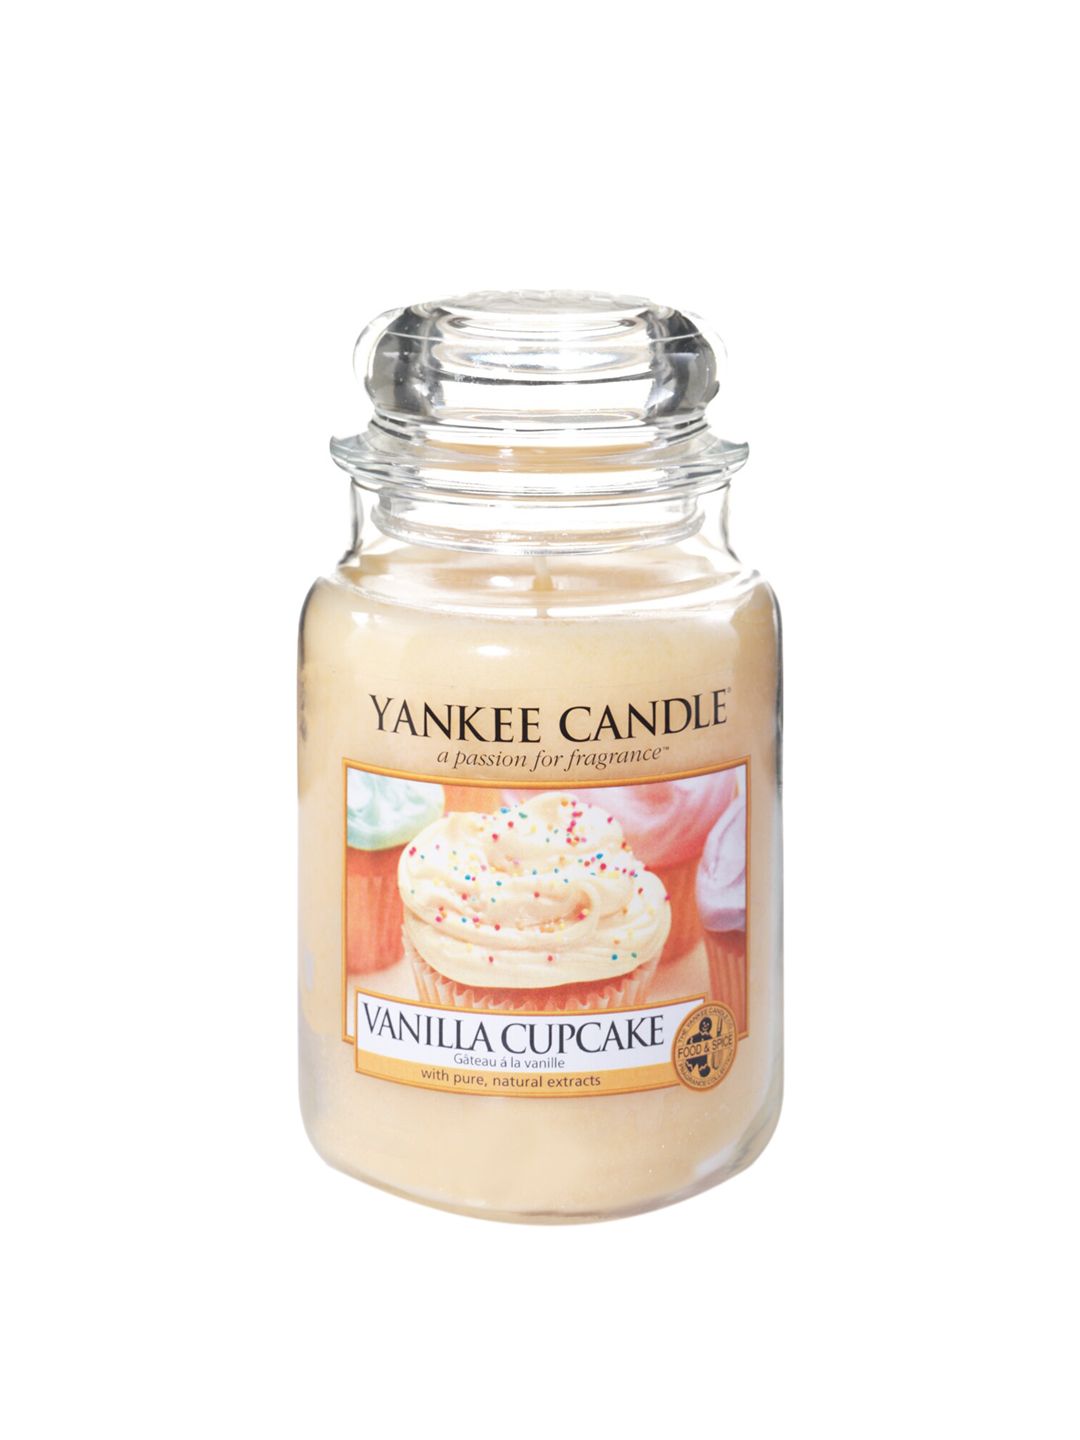 YANKEE CANDLE Cream-Coloured Classic Large Jar Vanilla Cupcake Scented Candles Price in India